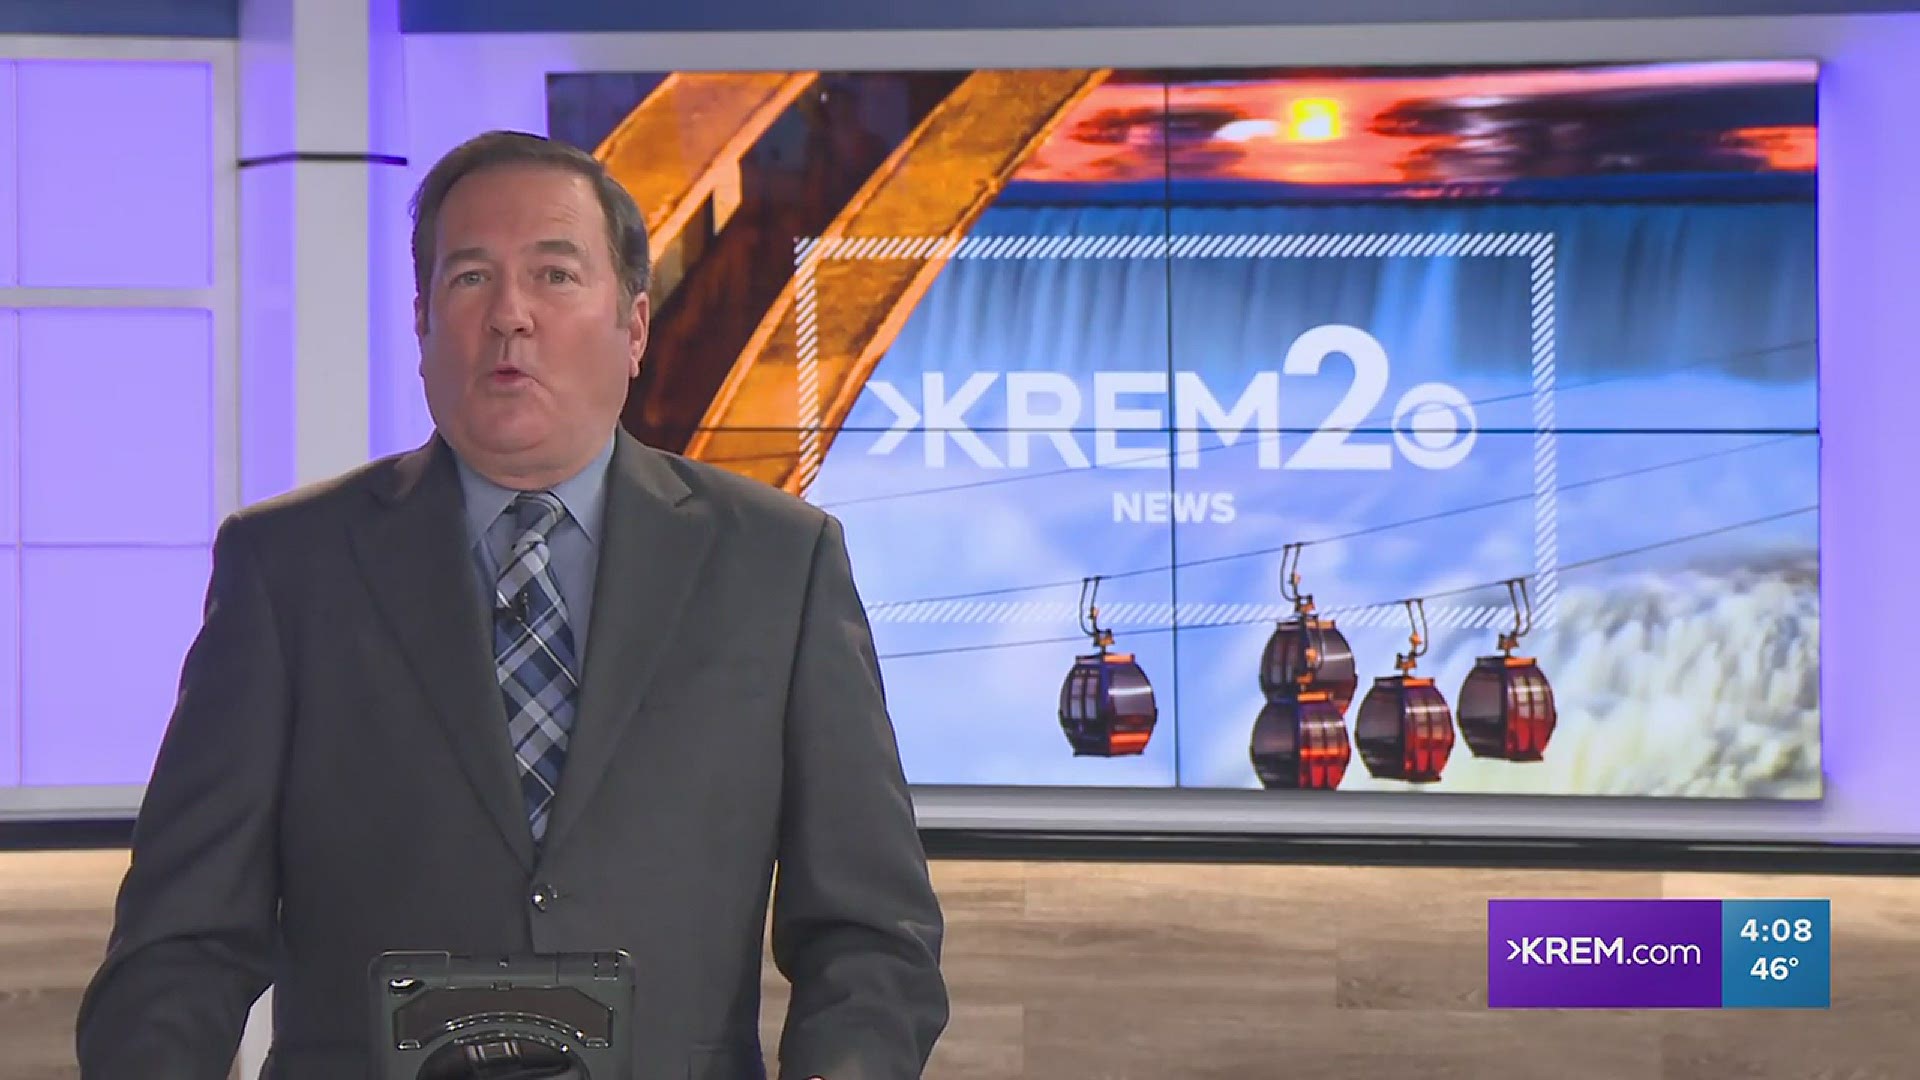 February is a special month in the annual Who Do You Love promotion for KREM and STCU.